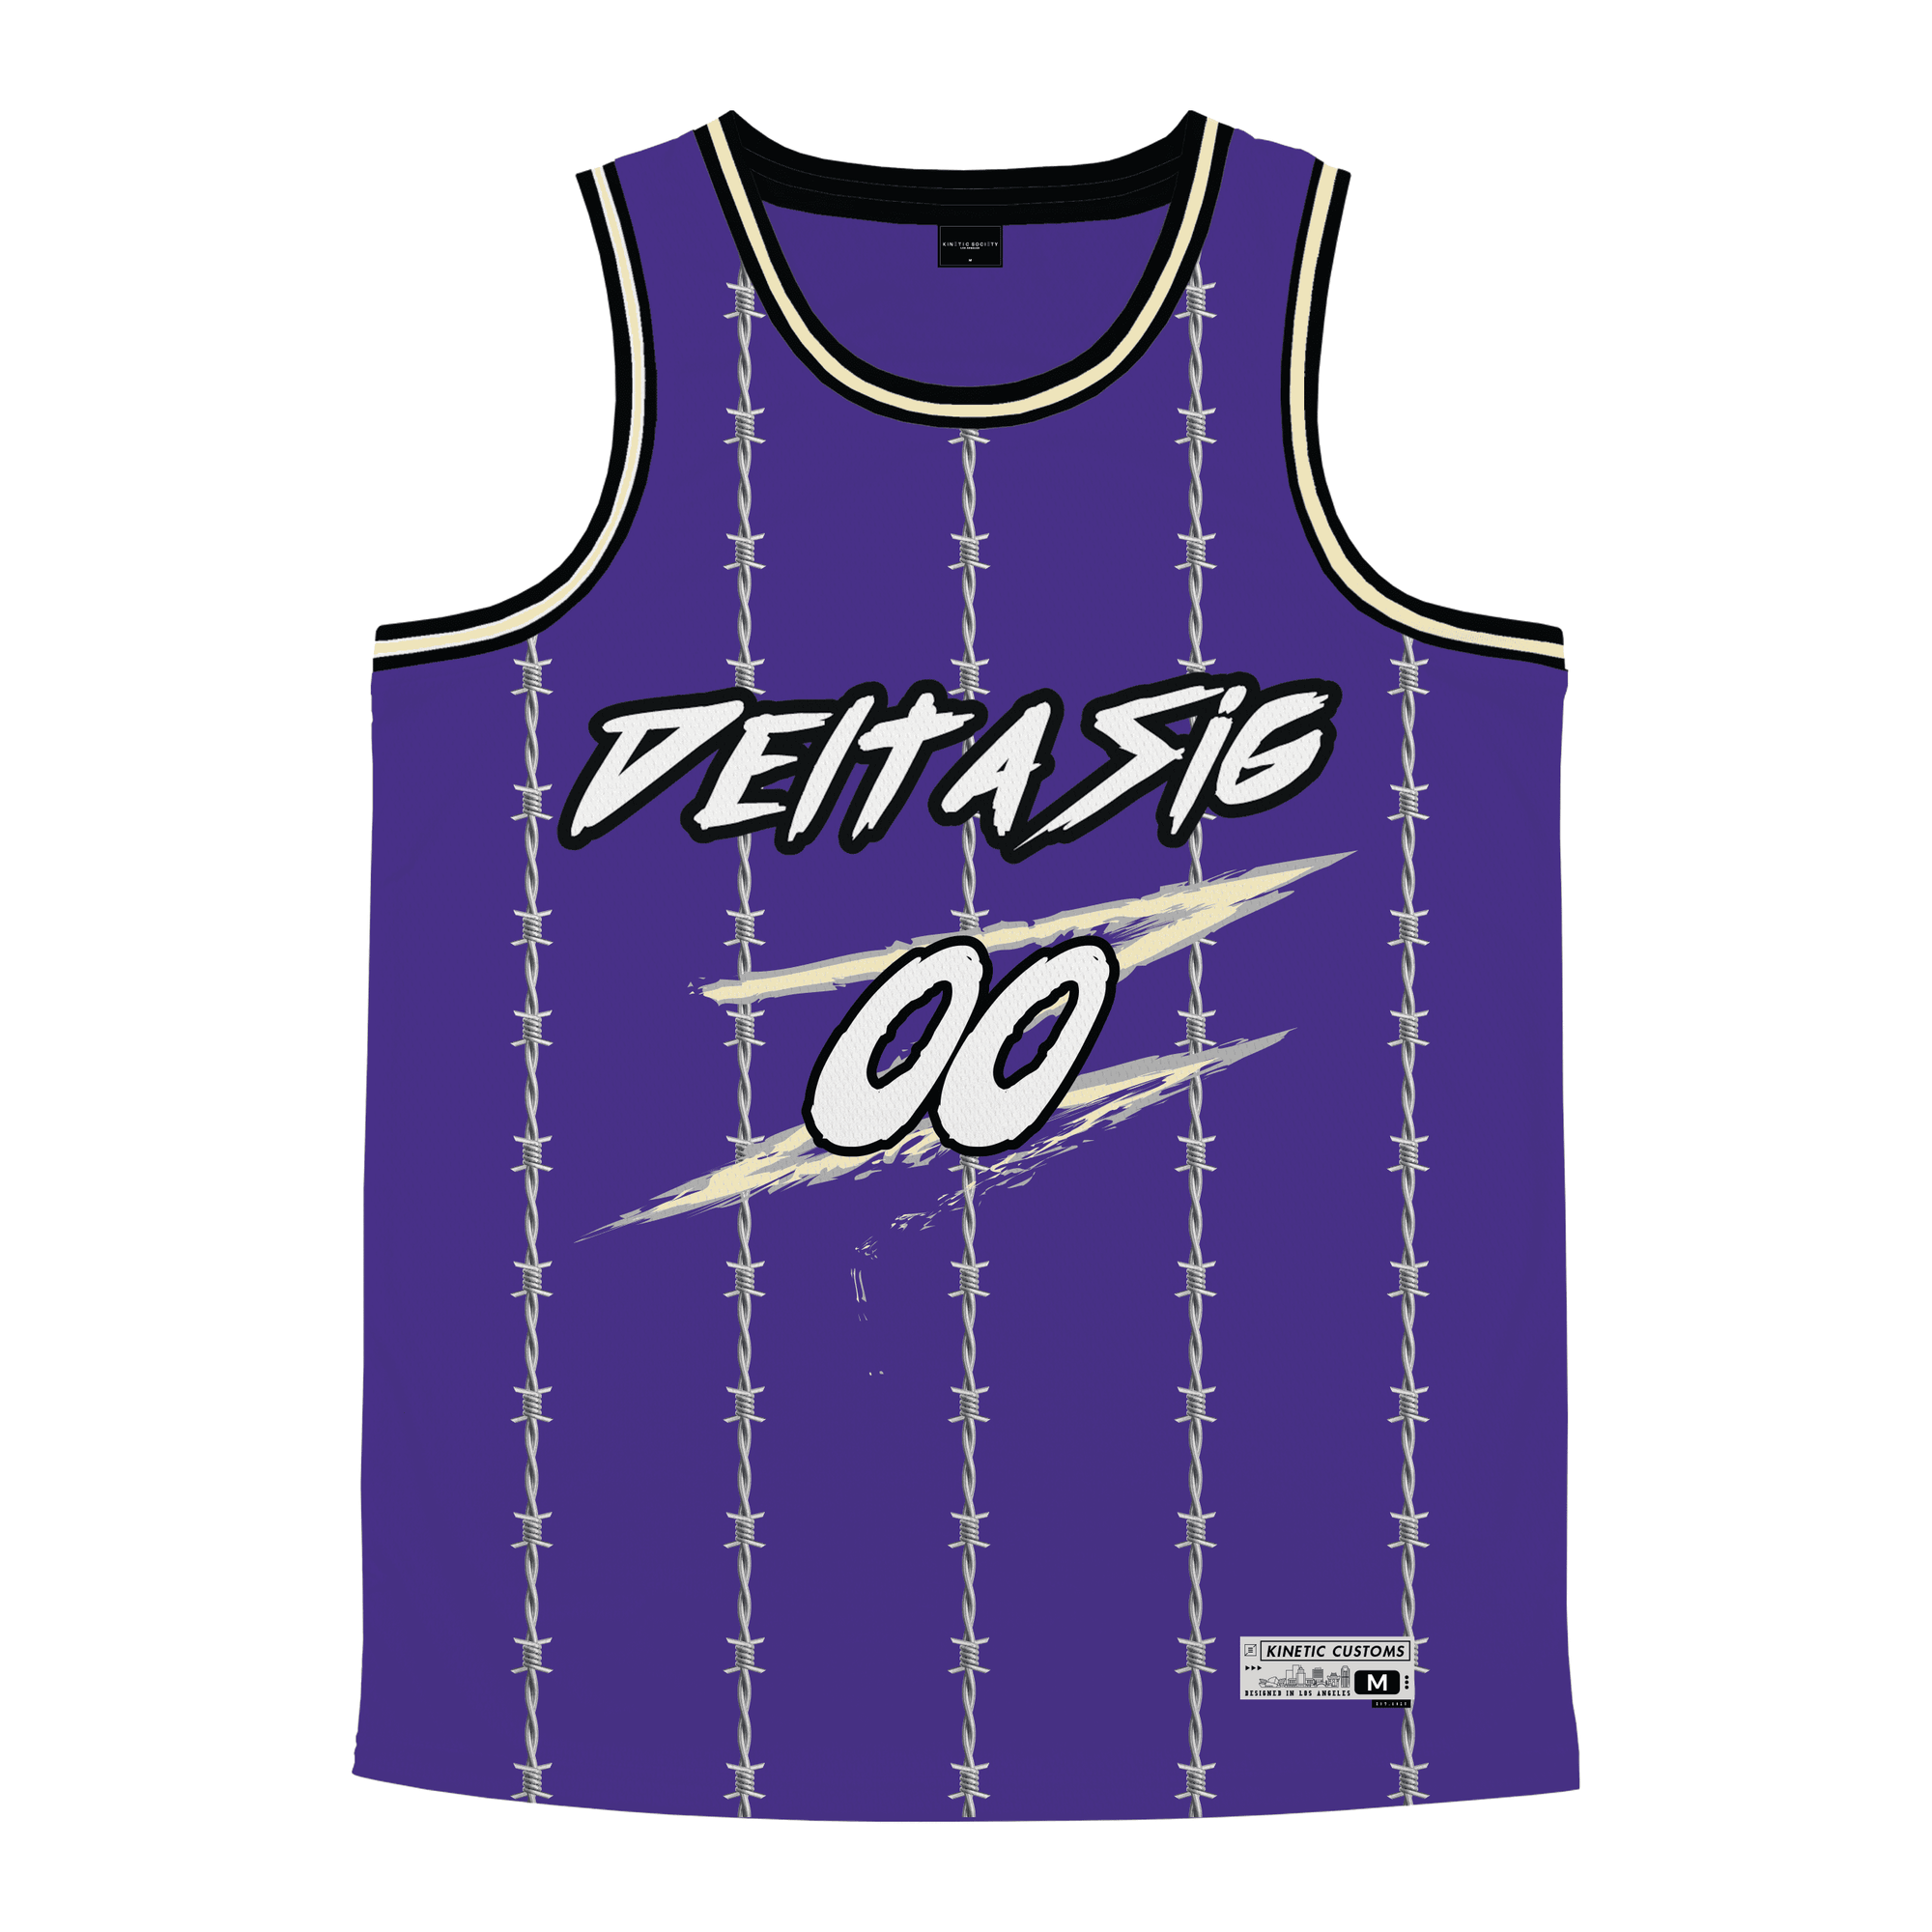 Delta Sigma Phi - Barbed Wire Basketball Jersey